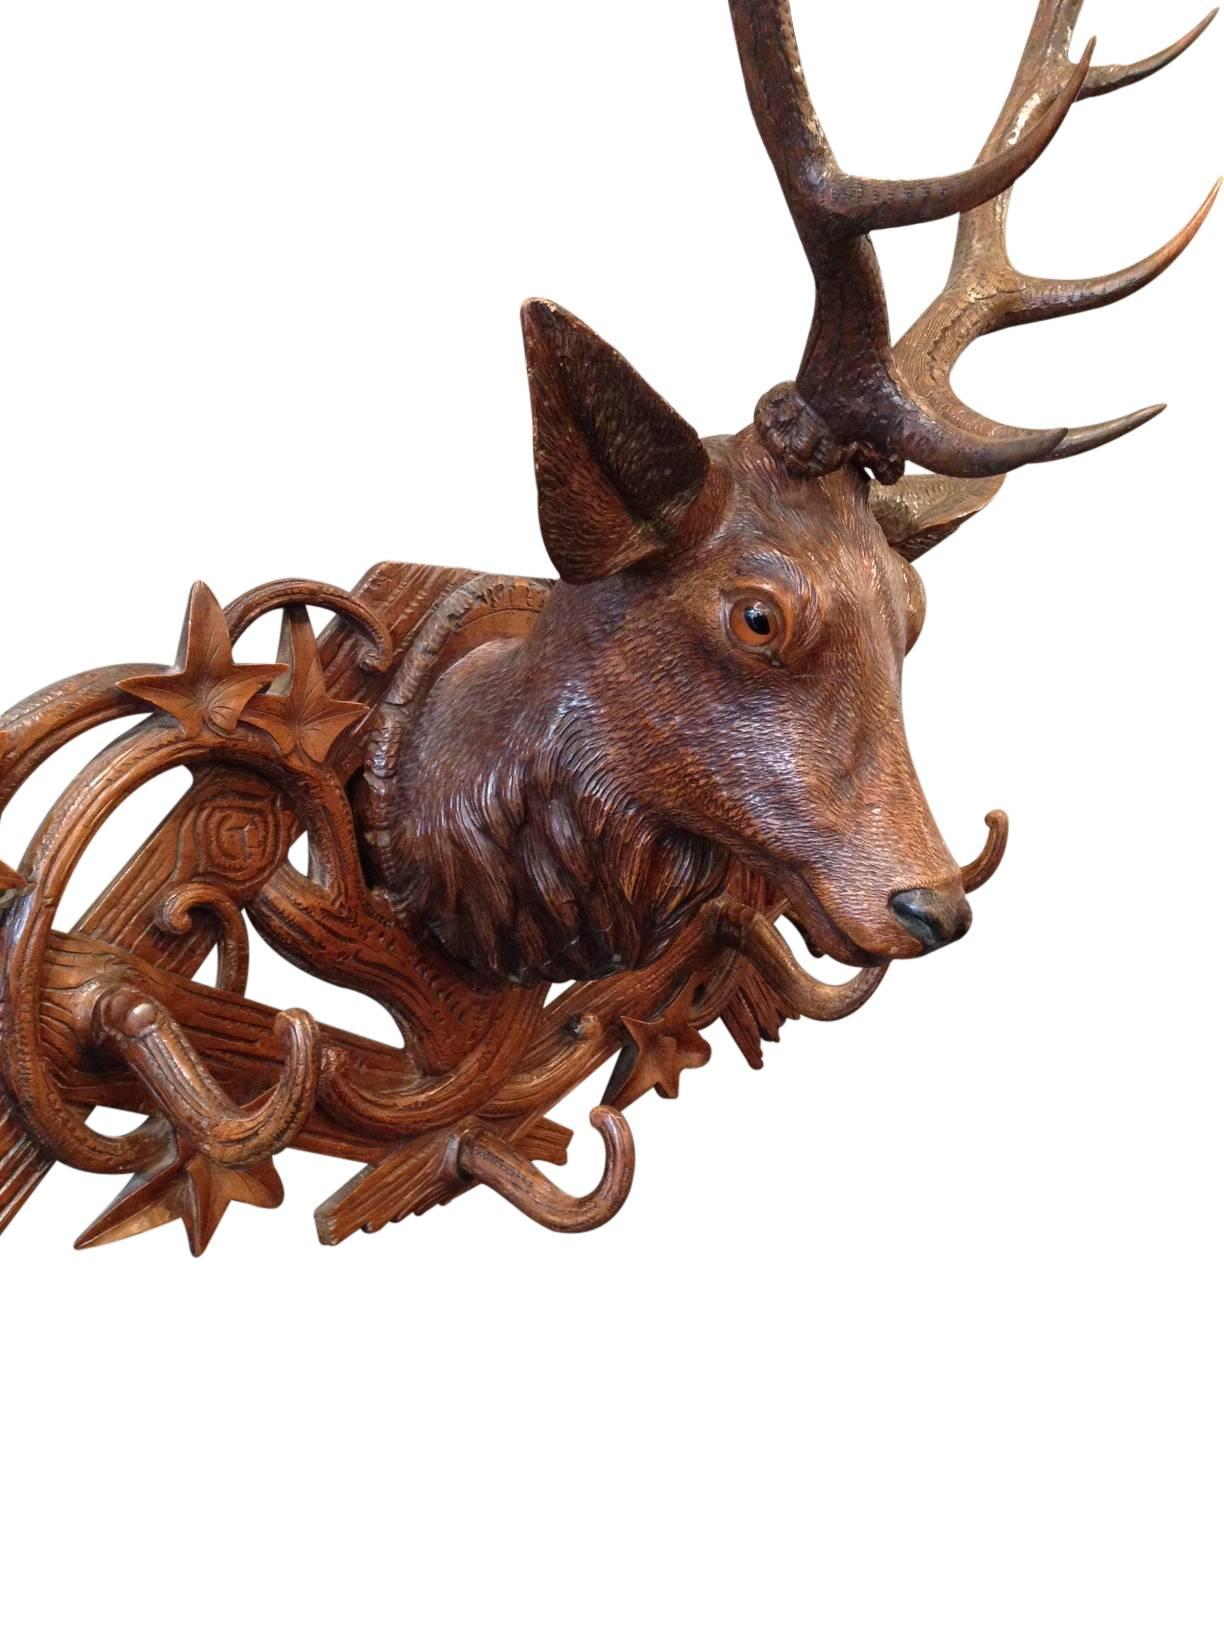 This is a Swiss “Black Forest” carved linden wood stag coat rack. It is very large and very rare. The stag’s head has carved linden wood antlers mounted upon a carved fence style plaque with vines. The overall size, detail and coloring makes this a